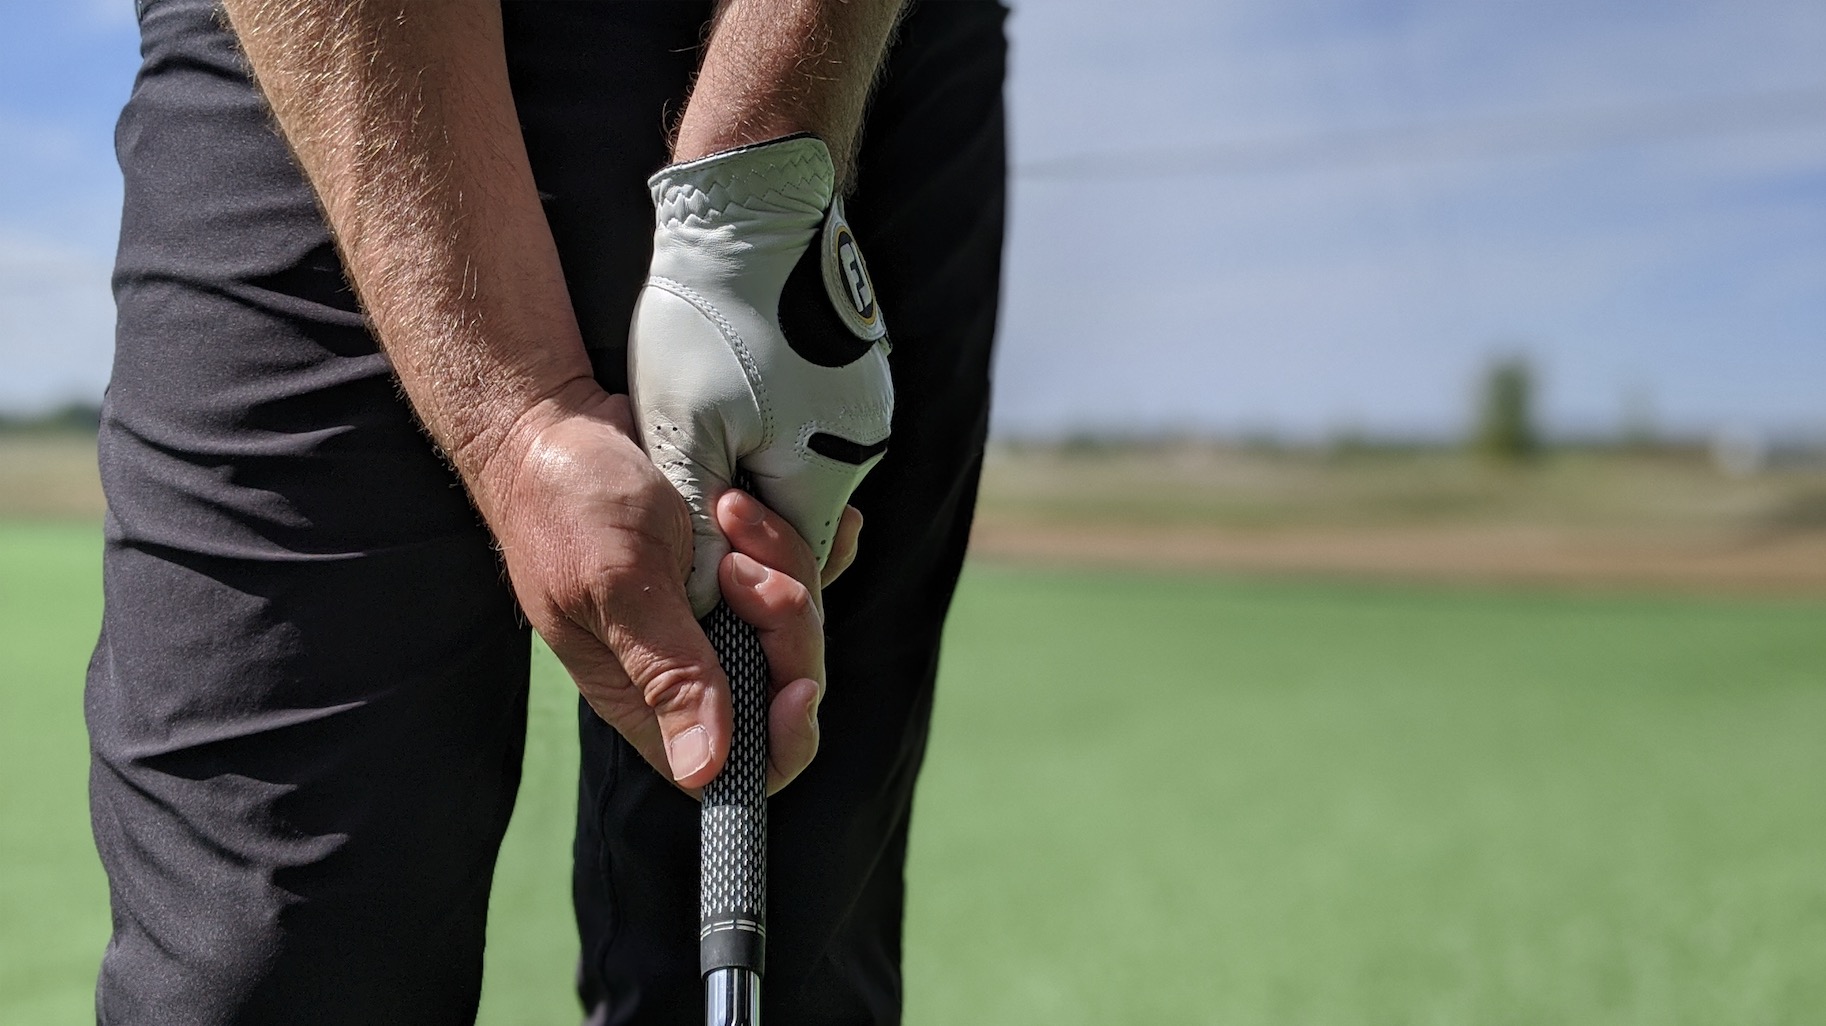 Golf Grip cheat sheet: Do you have the correct grip for your swing? - Golf